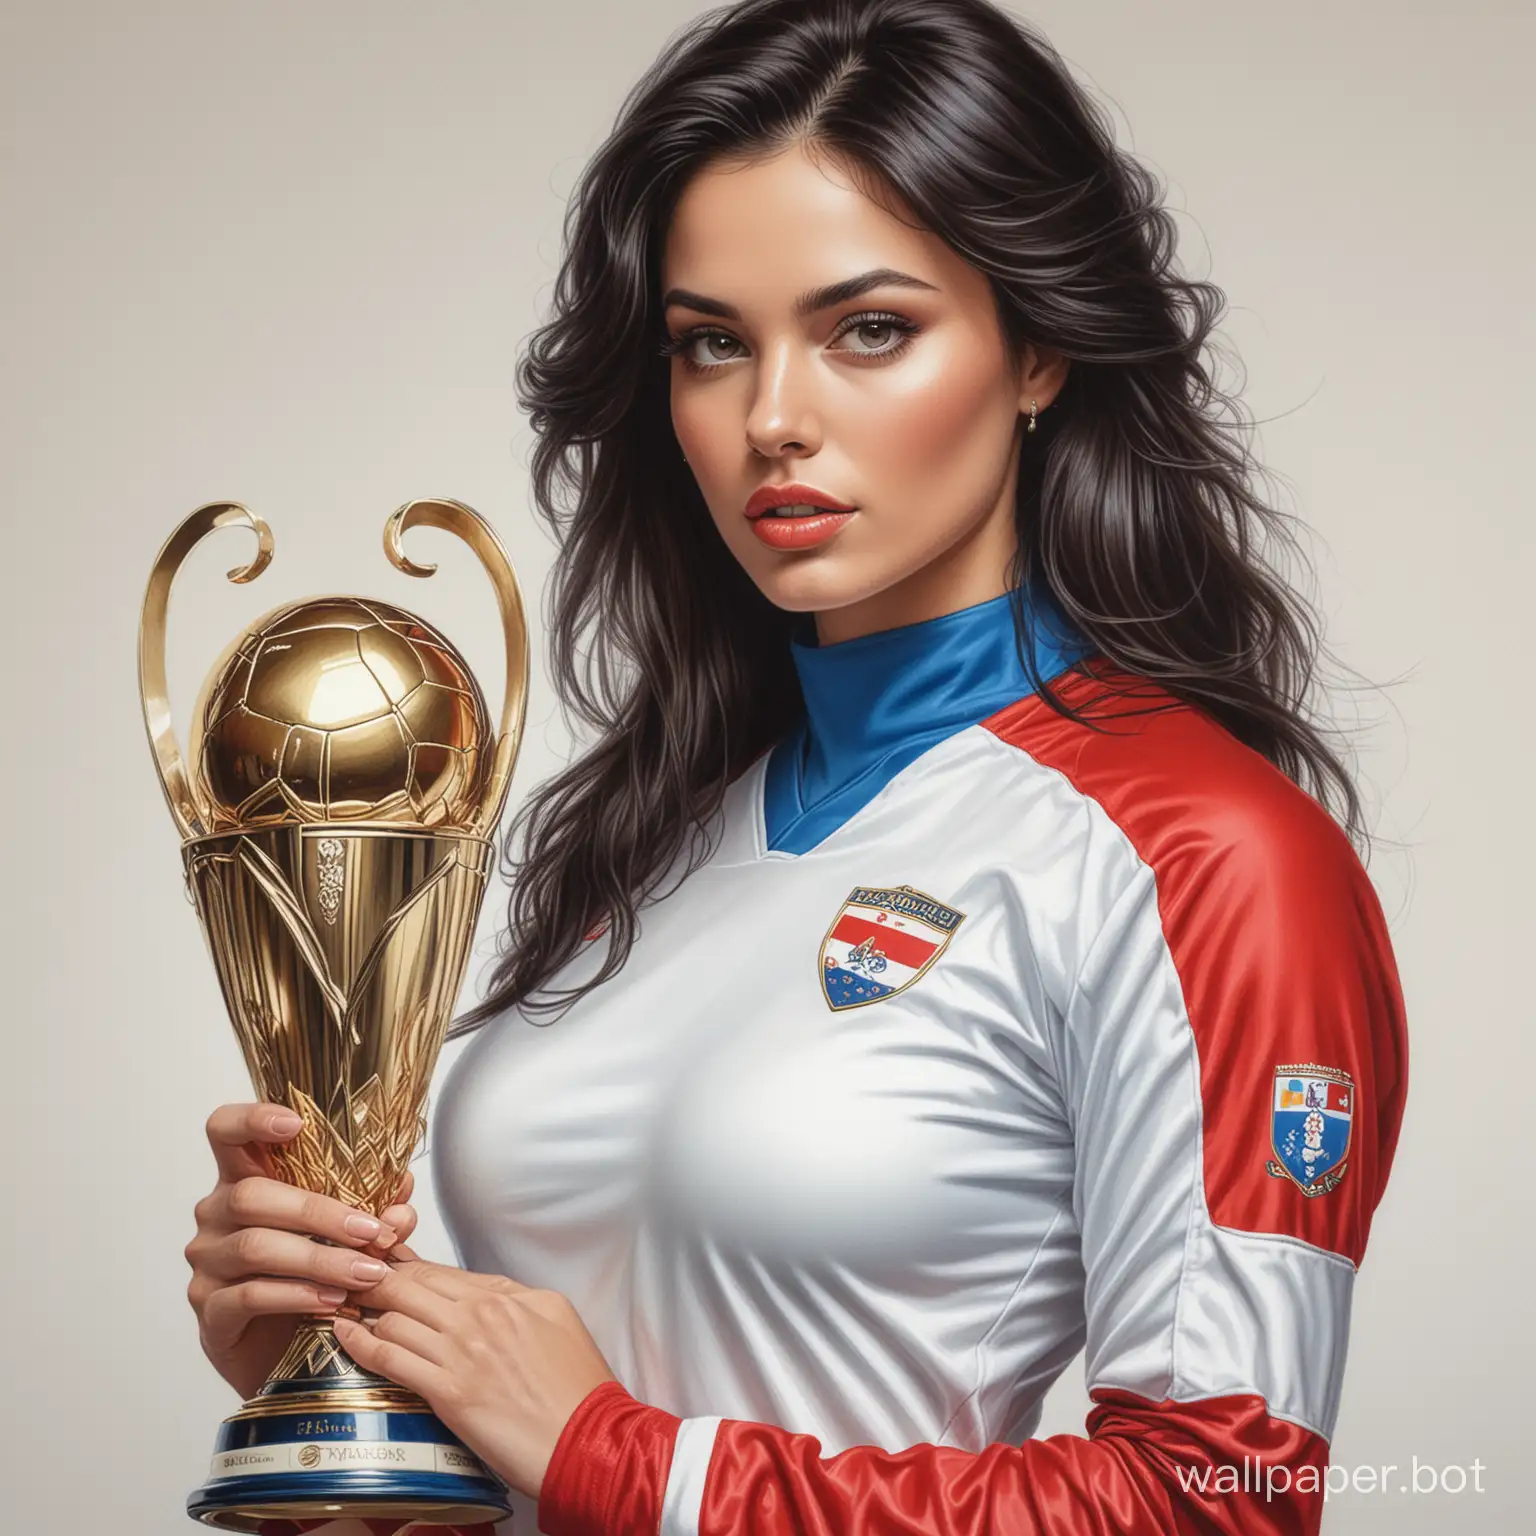 Sketch Alina Lanina 25 years old dark hair with styling 7th size chest narrow waist in white-red-blue football uniform, holding a large Champions Cup on a white background highly realistic drawing colored pencil style Boris Vallejo